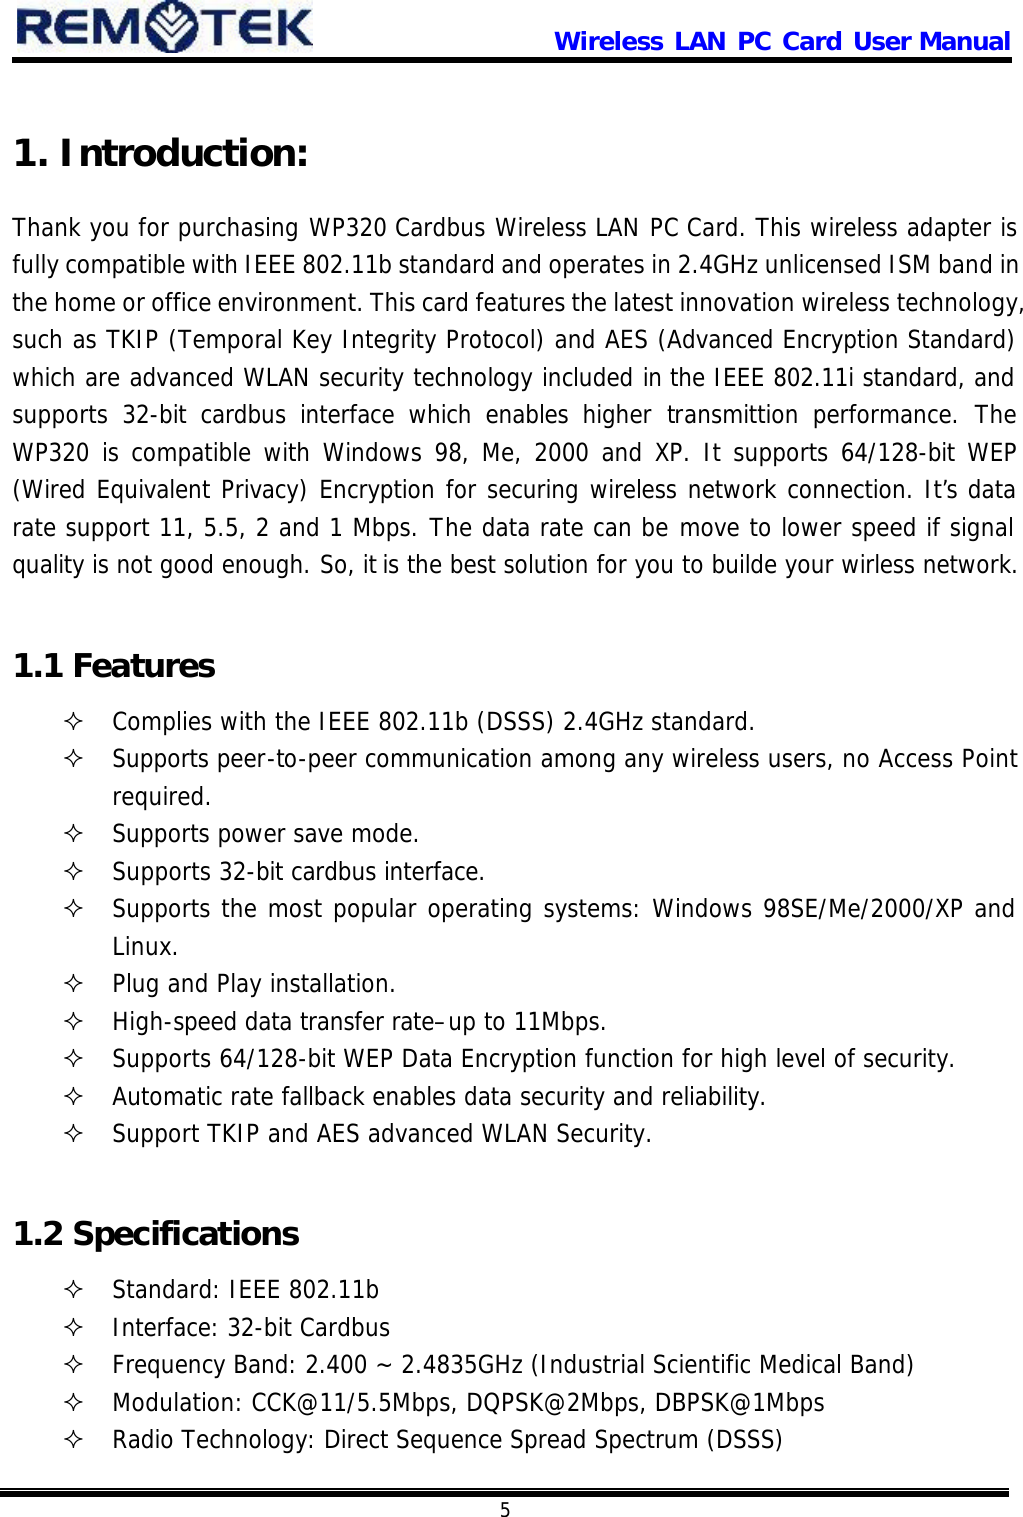                      Wireless LAN PC Card User Manual            5  1. Introduction: Thank you for purchasing WP320 Cardbus Wireless LAN PC Card. This wireless adapter is fully compatible with IEEE 802.11b standard and operates in 2.4GHz unlicensed ISM band in the home or office environment. This card features the latest innovation wireless technology, such as TKIP (Temporal Key Integrity Protocol) and AES (Advanced Encryption Standard) which are advanced WLAN security technology included in the IEEE 802.11i standard, and supports 32-bit cardbus interface which enables higher transmittion performance. The WP320 is compatible with Windows 98, Me, 2000 and XP. It supports 64/128-bit WEP (Wired Equivalent Privacy) Encryption for securing wireless network connection. It’s data rate support 11, 5.5, 2 and 1 Mbps. The data rate can be move to lower speed if signal quality is not good enough. So, it is the best solution for you to builde your wirless network.  1.1 Features ² Complies with the IEEE 802.11b (DSSS) 2.4GHz standard. ² Supports peer-to-peer communication among any wireless users, no Access Point required. ² Supports power save mode. ² Supports 32-bit cardbus interface. ² Supports the most popular operating systems: Windows 98SE/Me/2000/XP and Linux. ² Plug and Play installation. ² High-speed data transfer rate–up to 11Mbps. ² Supports 64/128-bit WEP Data Encryption function for high level of security. ² Automatic rate fallback enables data security and reliability. ² Support TKIP and AES advanced WLAN Security.  1.2 Specifications ² Standard: IEEE 802.11b ² Interface: 32-bit Cardbus ² Frequency Band: 2.400 ~ 2.4835GHz (Industrial Scientific Medical Band) ² Modulation: CCK@11/5.5Mbps, DQPSK@2Mbps, DBPSK@1Mbps ² Radio Technology: Direct Sequence Spread Spectrum (DSSS) 